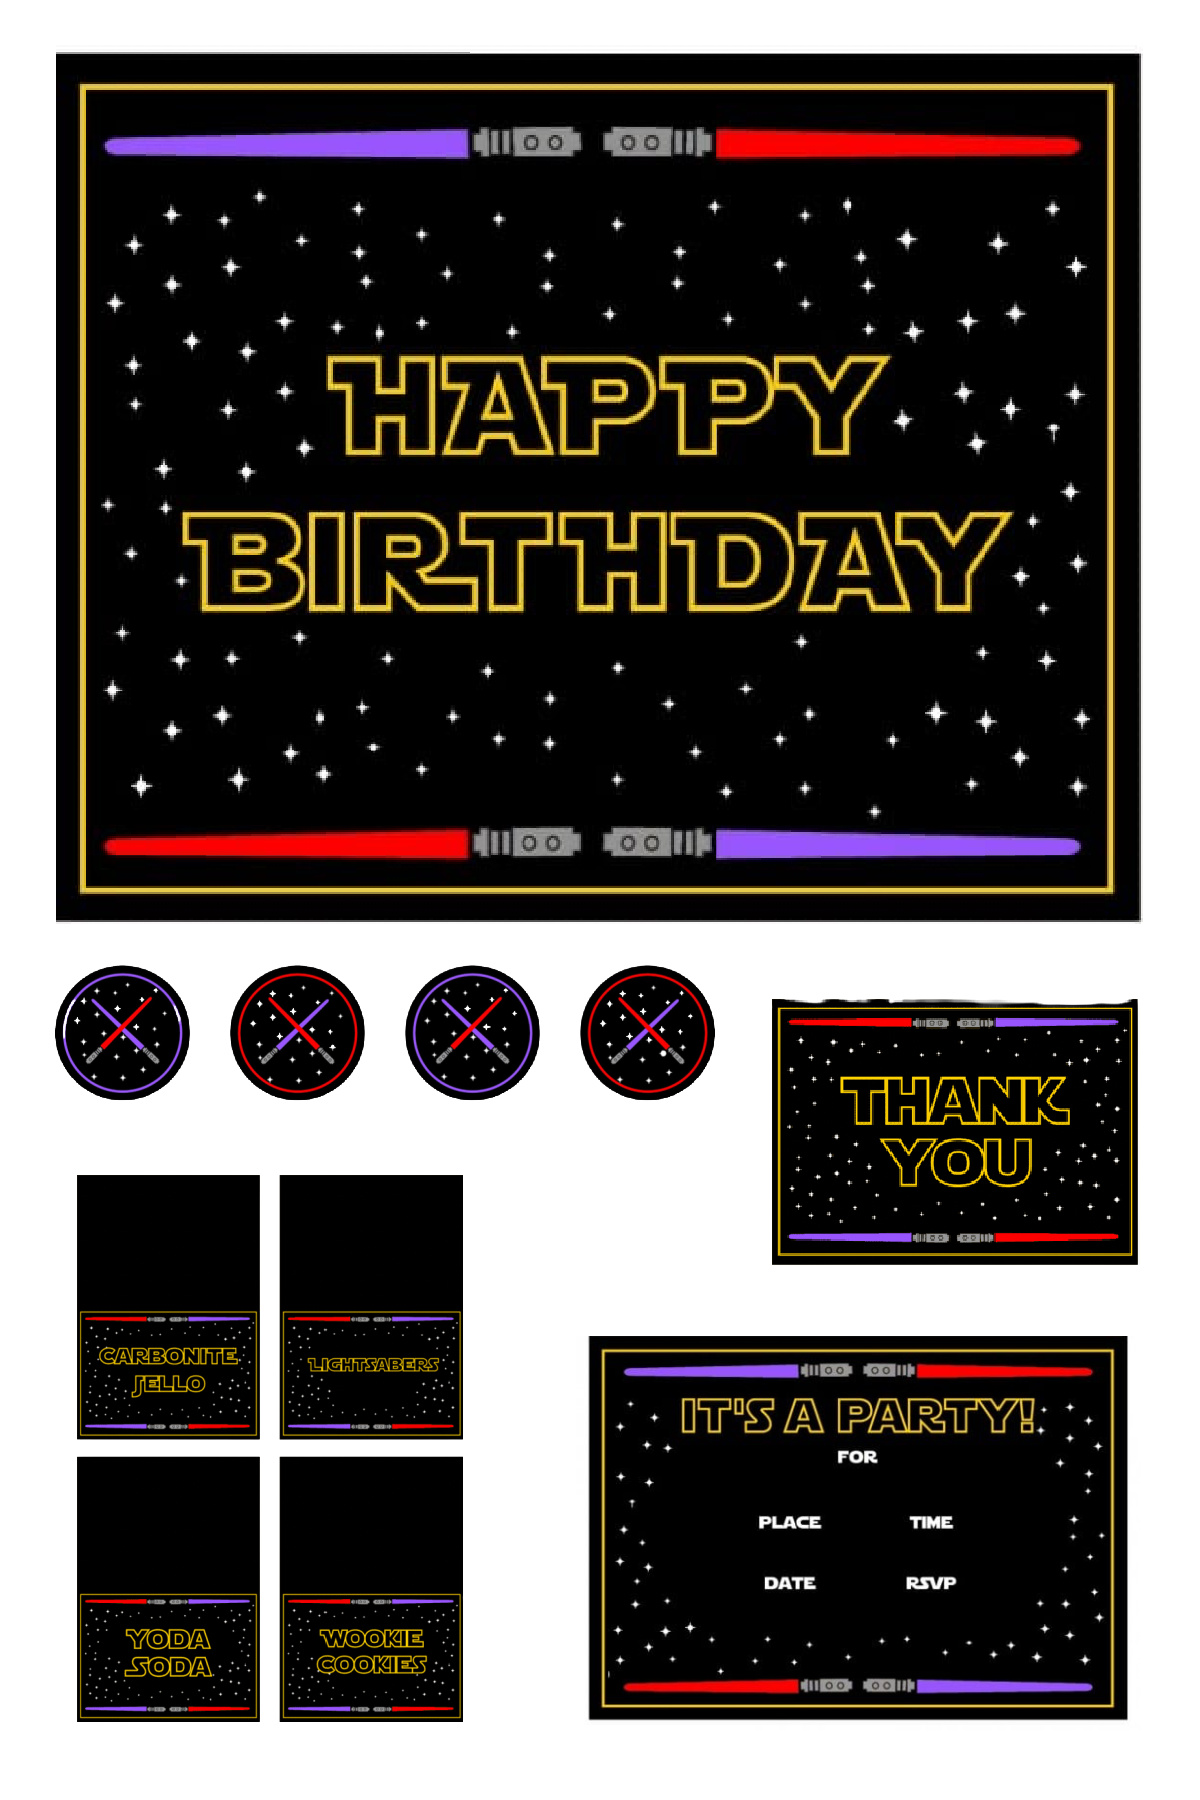 Free Star Wars Party Printables